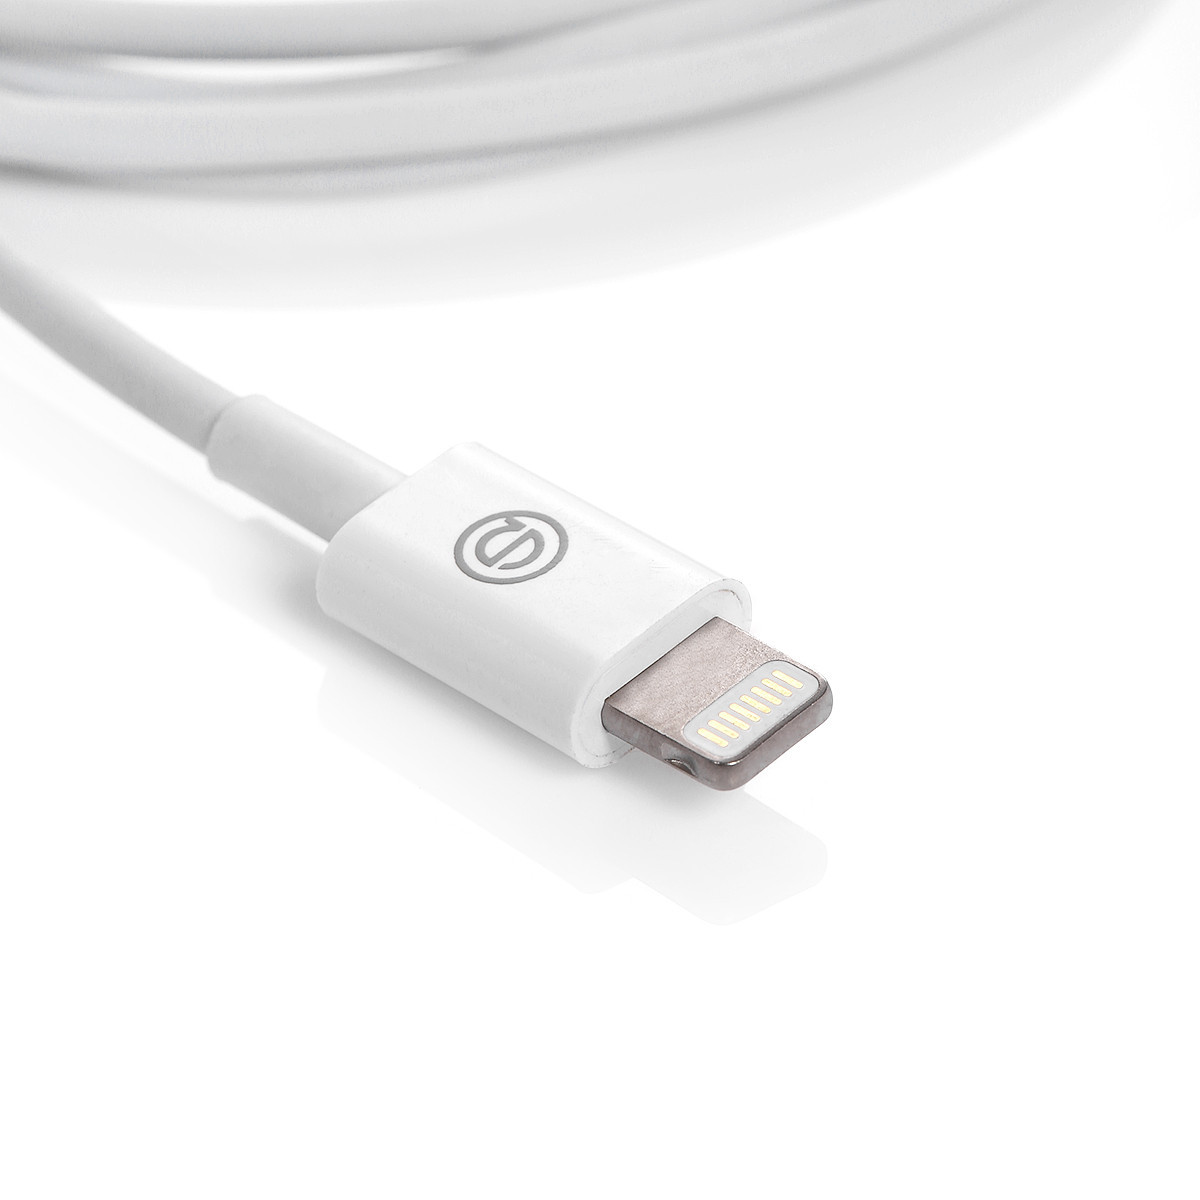 3ft 1m 8 Pin USB Data Transfer Cable Cord Sync , iPhone USB 2.0 Cable